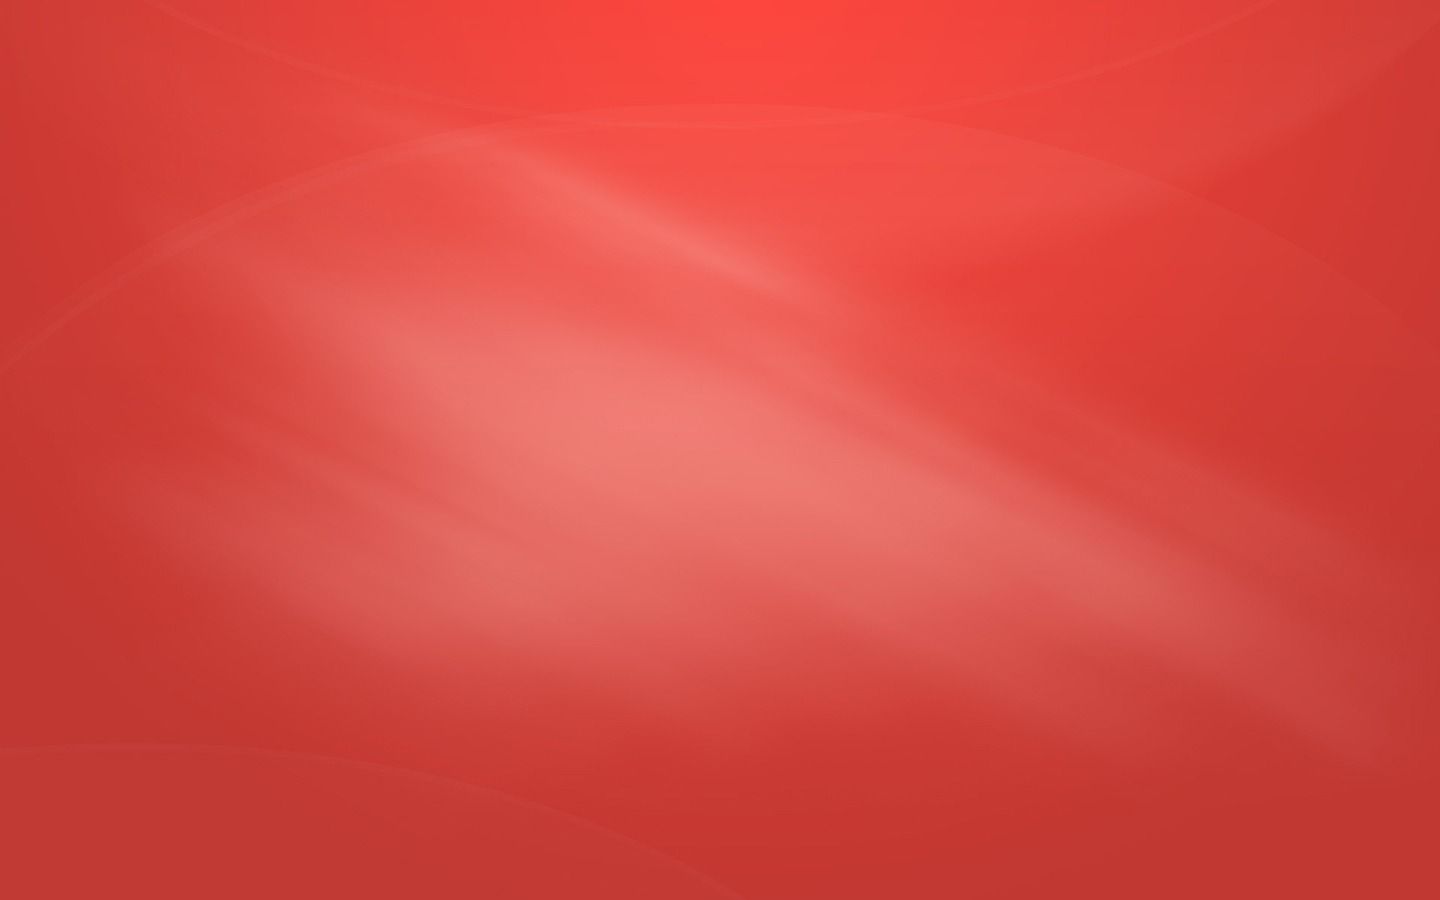 A red background with a white swirl in the middle - Light red